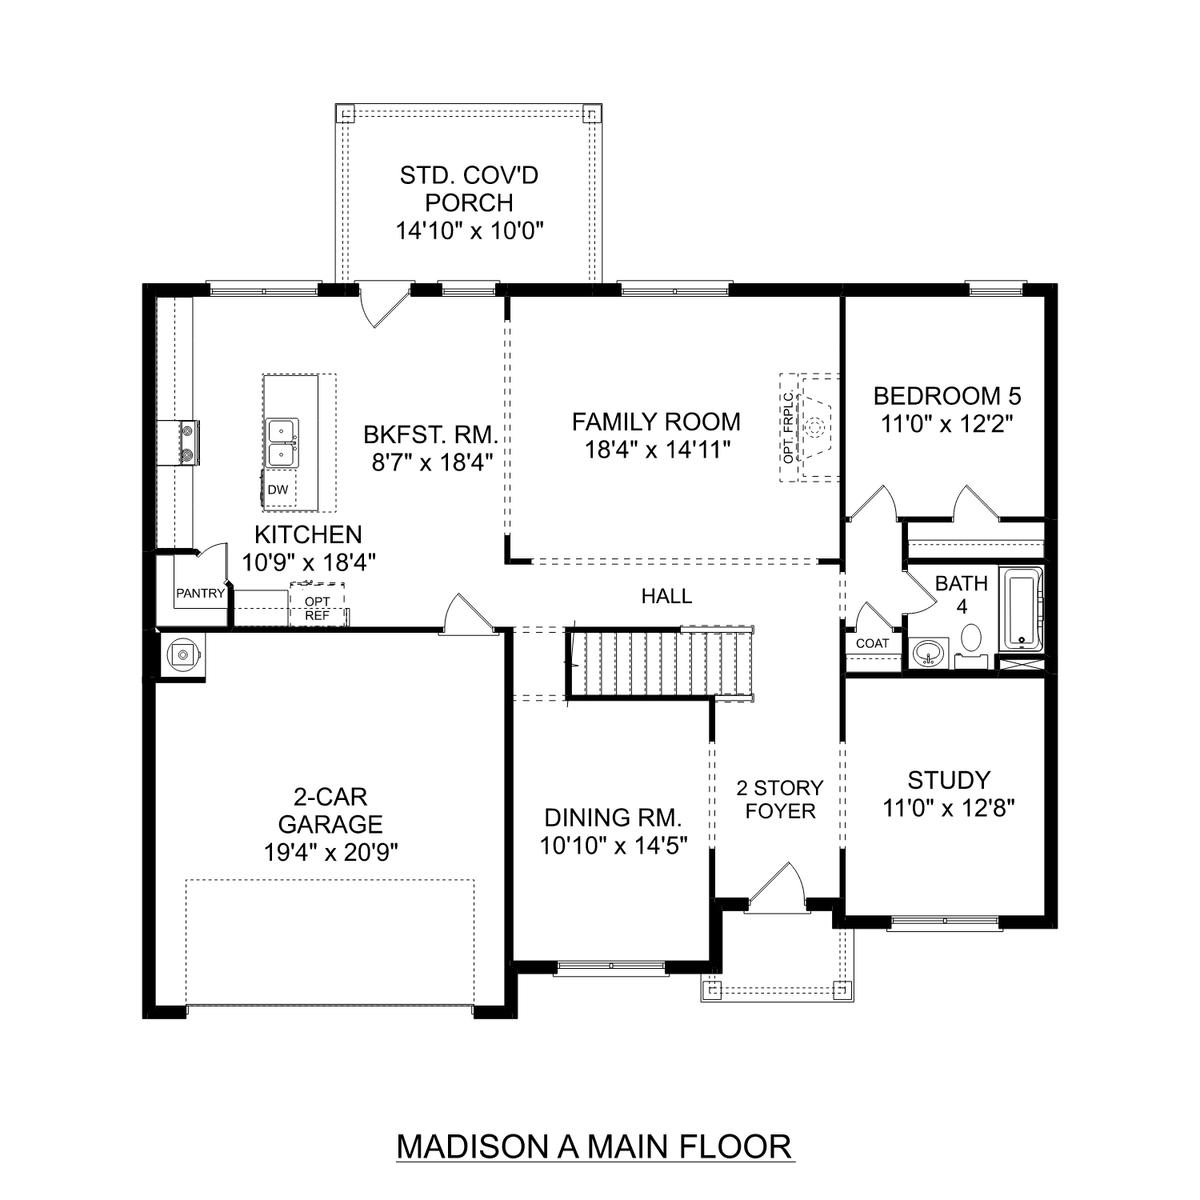 1 - The Madison A buildable floor plan layout in Davidson Homes' River Road Estates community.